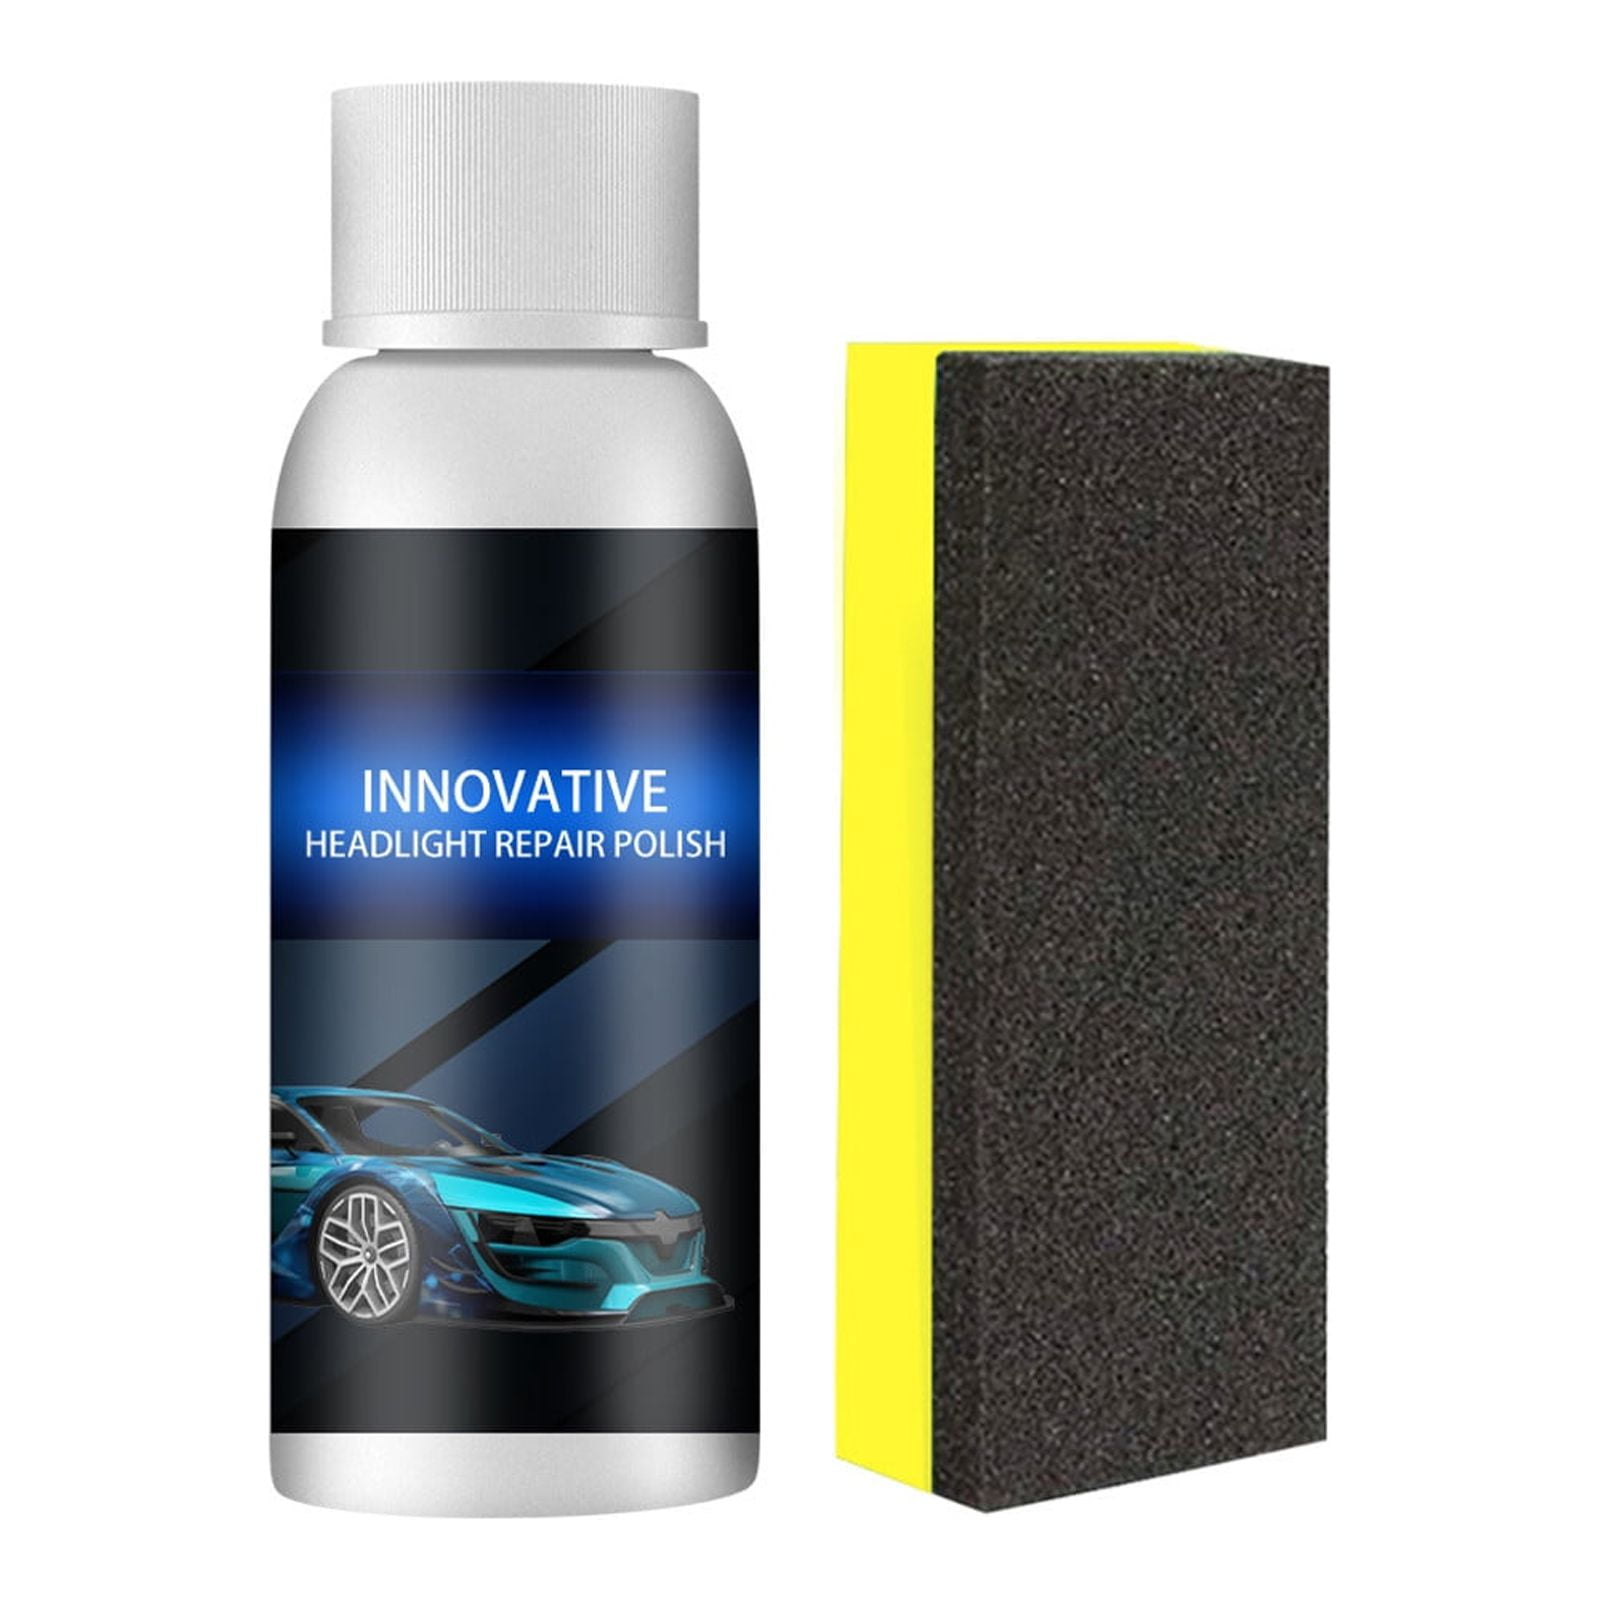 Hydrophobic 50ML Car Headlight Restoration Kit With Headlamp Repair  Cleaner, Glass Coating, Auto Polish Cleaning Coat, And Plating Free Keyword  Research Tool HGKJ 8 From Blake Online, $2.52